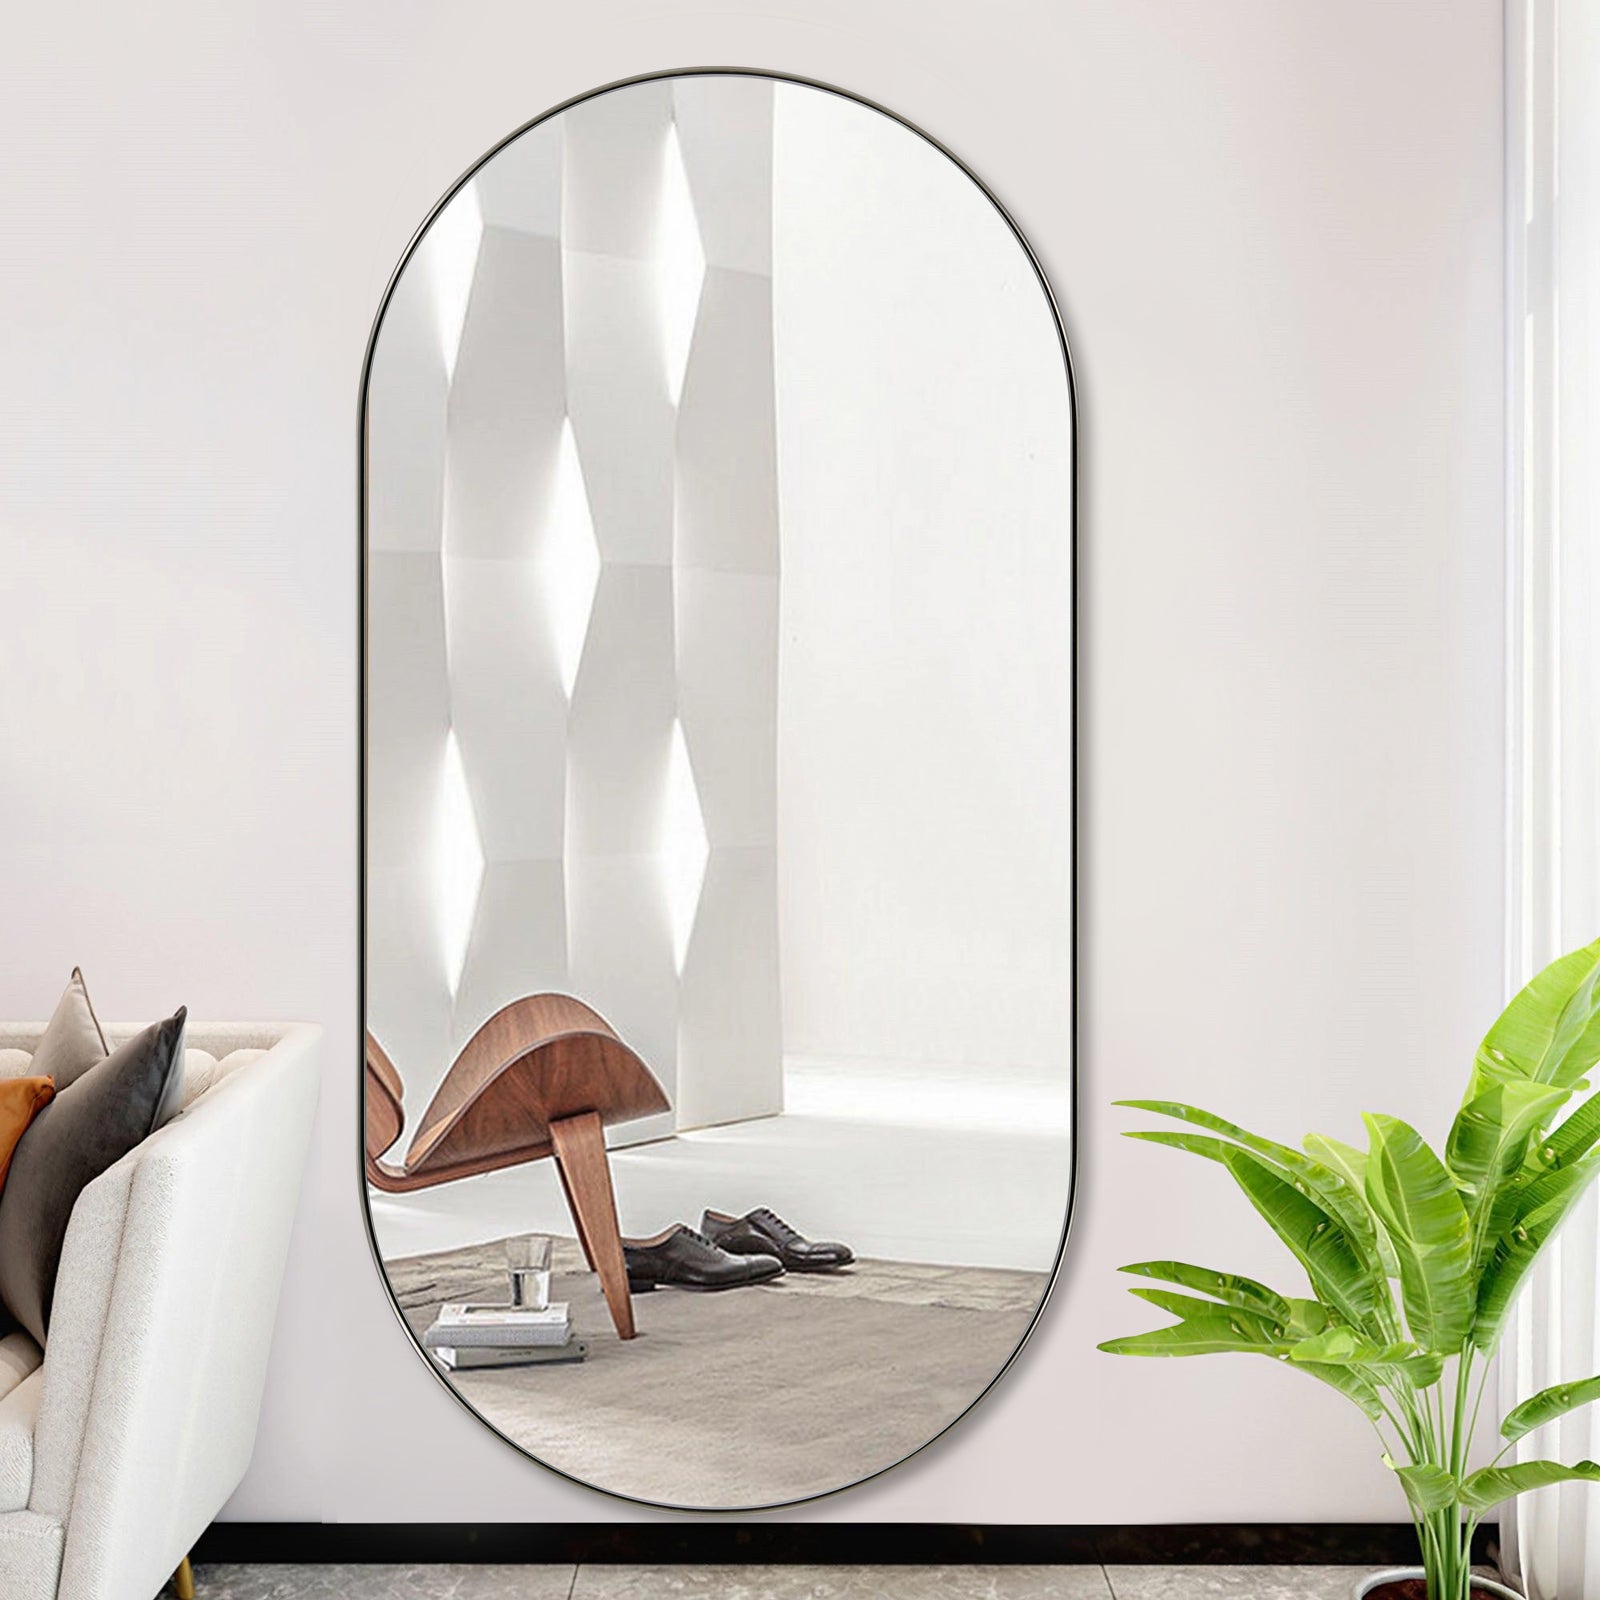 Full Length Pill Shaped Mirrors Wall Mounted, Full Body Long Leaning Mirror